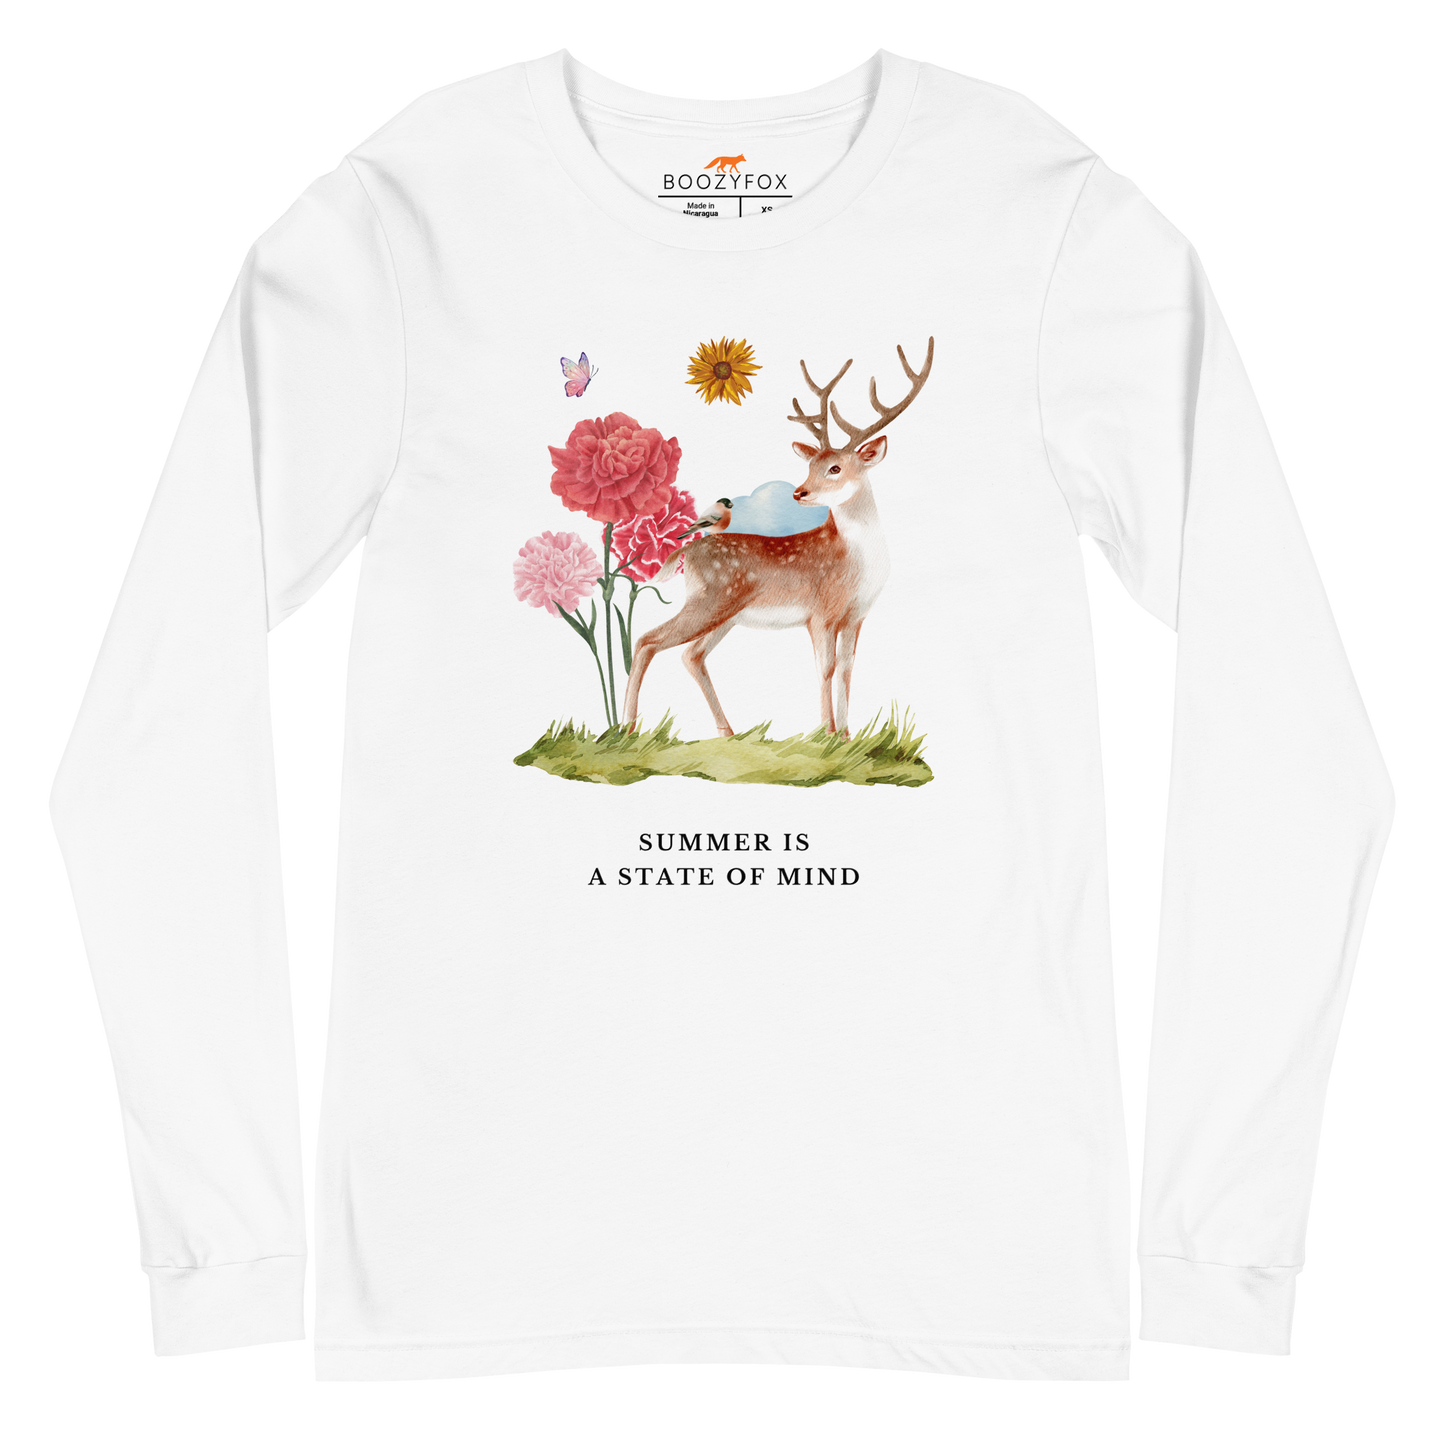 White Summer Is a State of Mind Long Sleeve Tee featuring a Summer Is a State of Mind graphic on the chest - Cute Summer Long Sleeve Graphic Tees - Boozy Fox